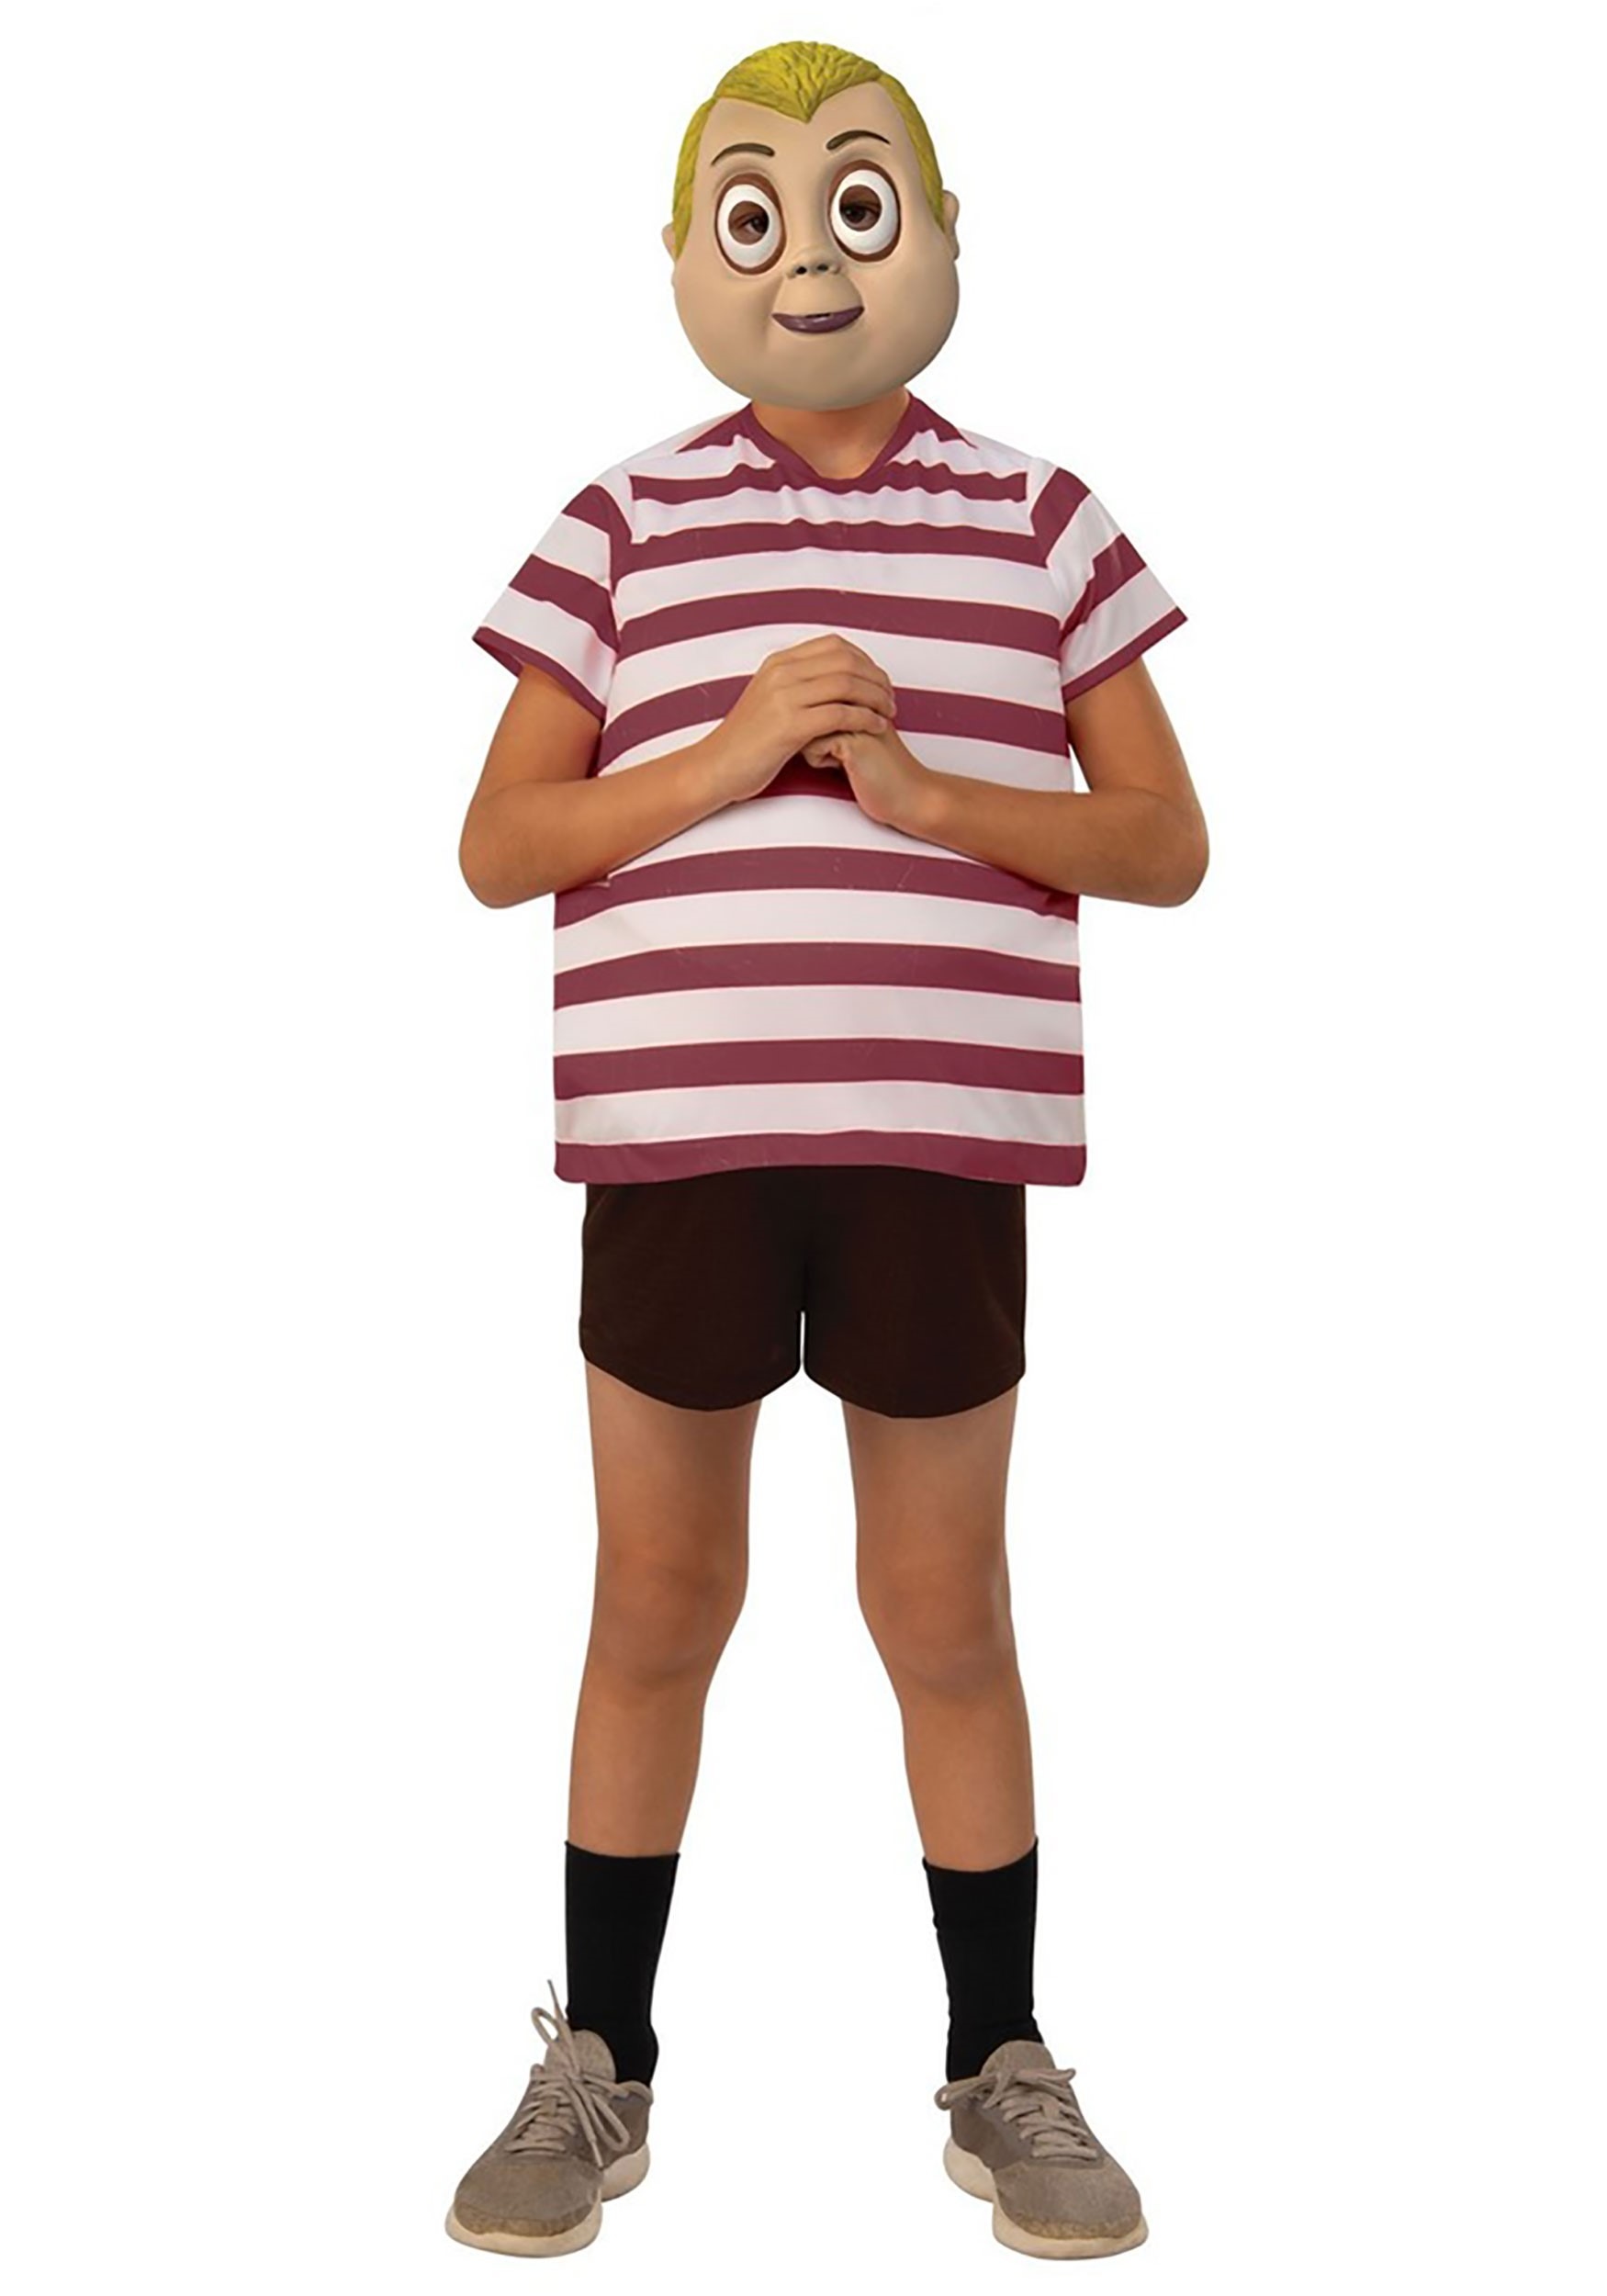 The Addams Family Pugsley Costume for Kids